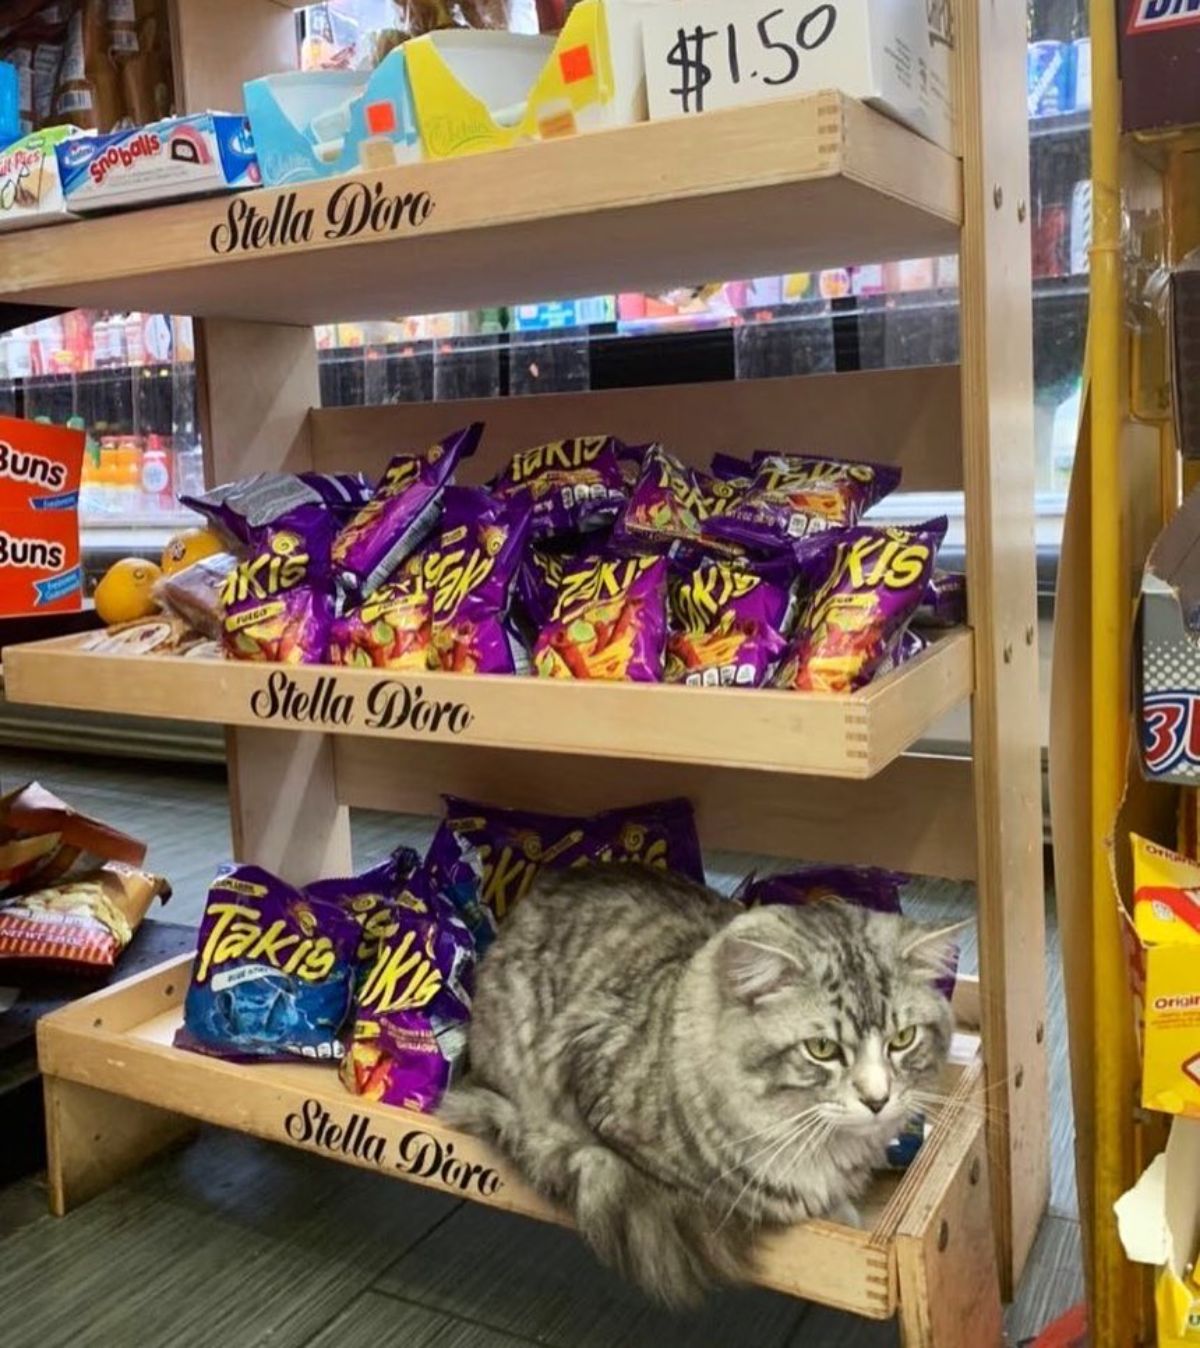 grey and white tabby cat sleeping on a shelf next to packets of chips